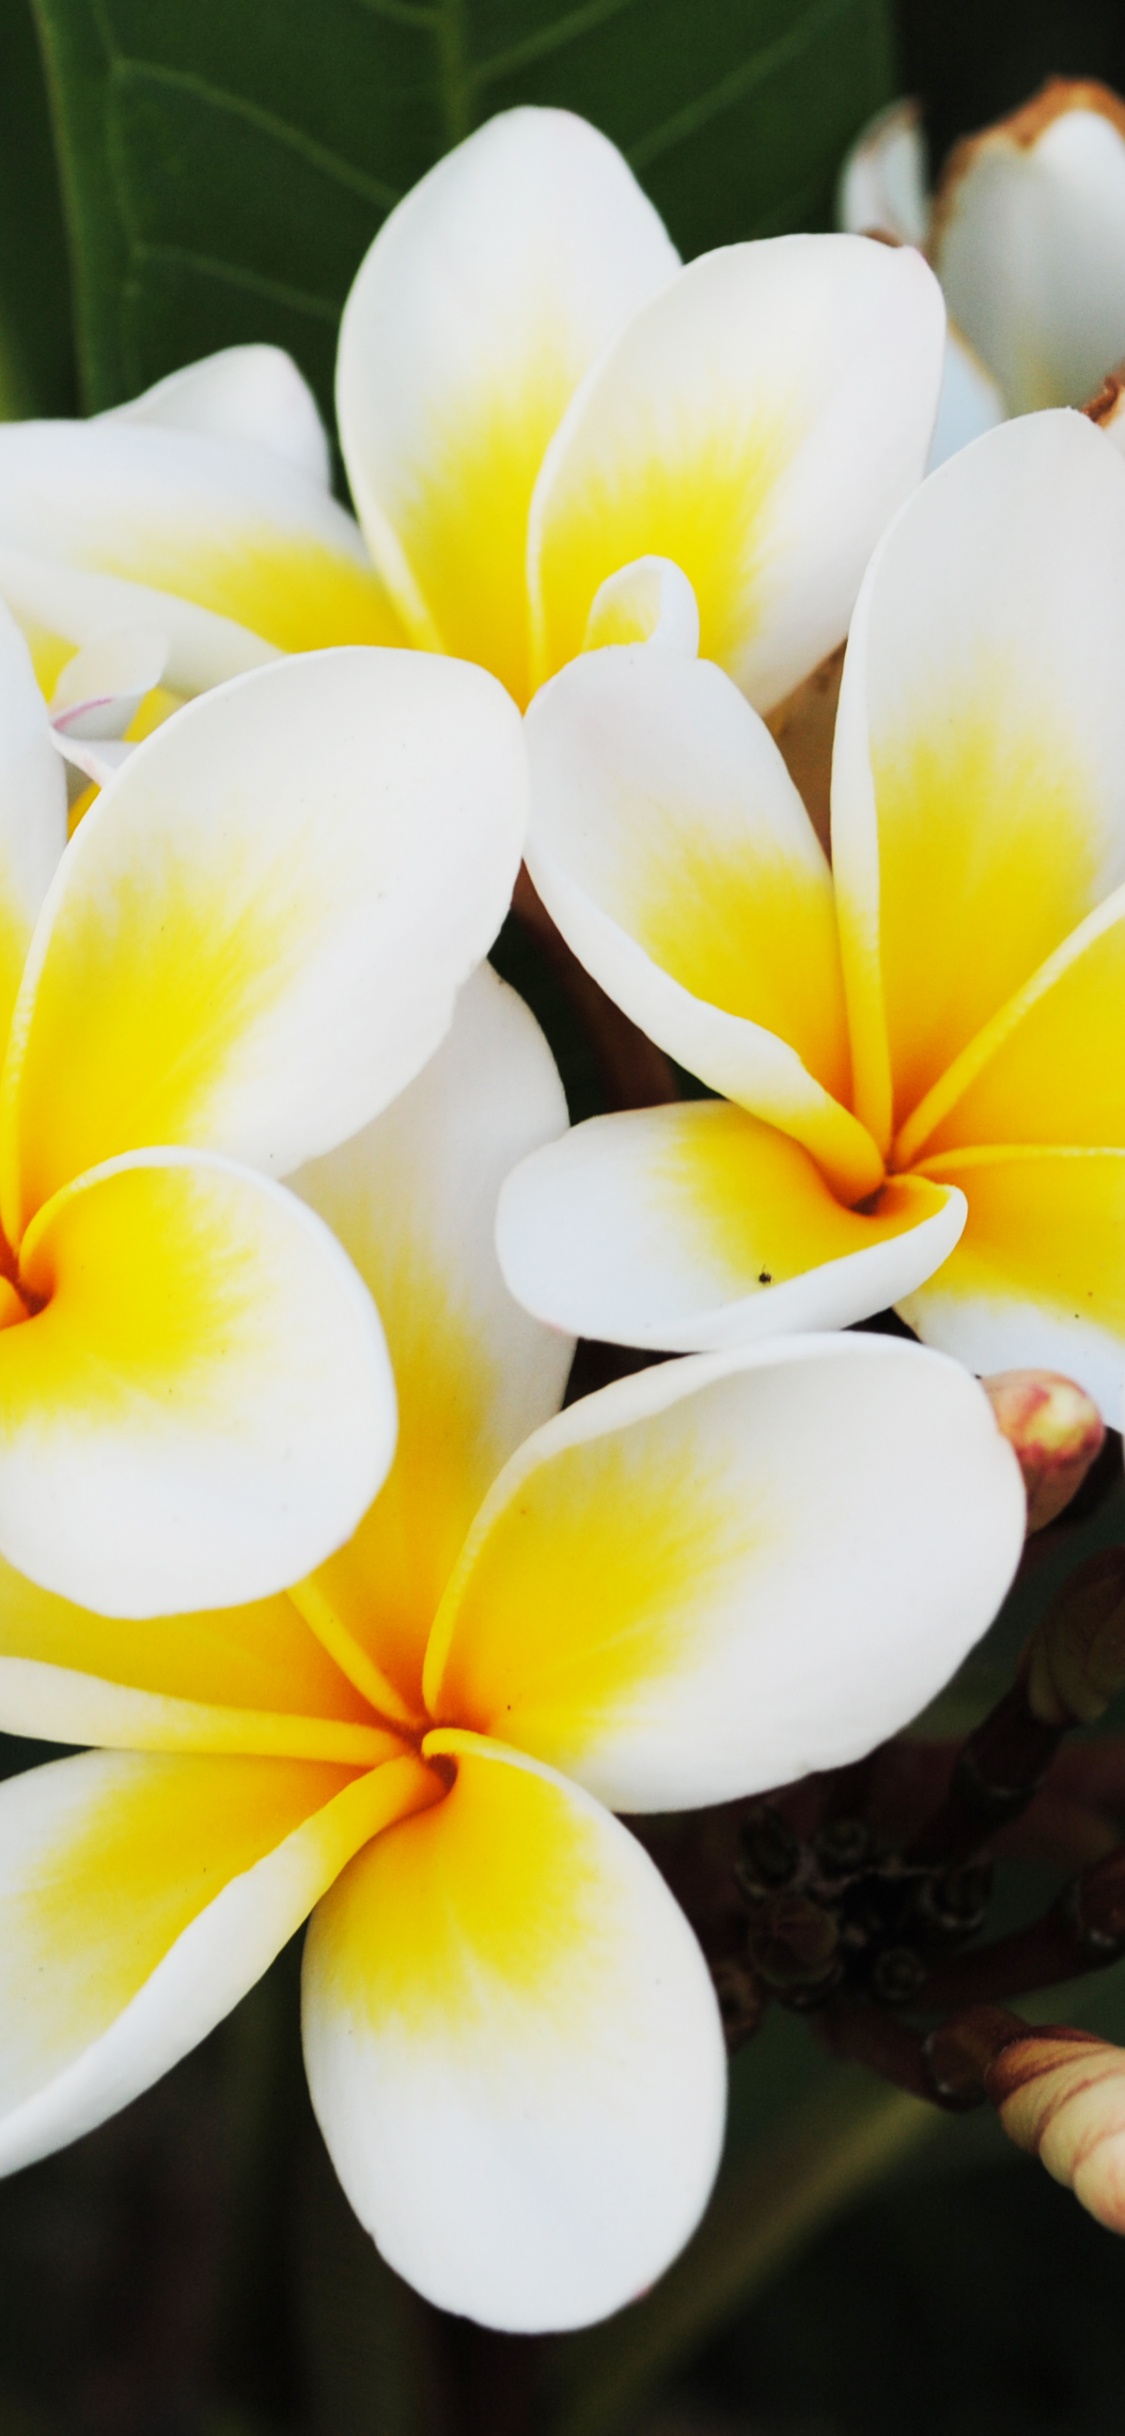 White and Yellow Flower in Close up Photography. Wallpaper in 1125x2436 Resolution